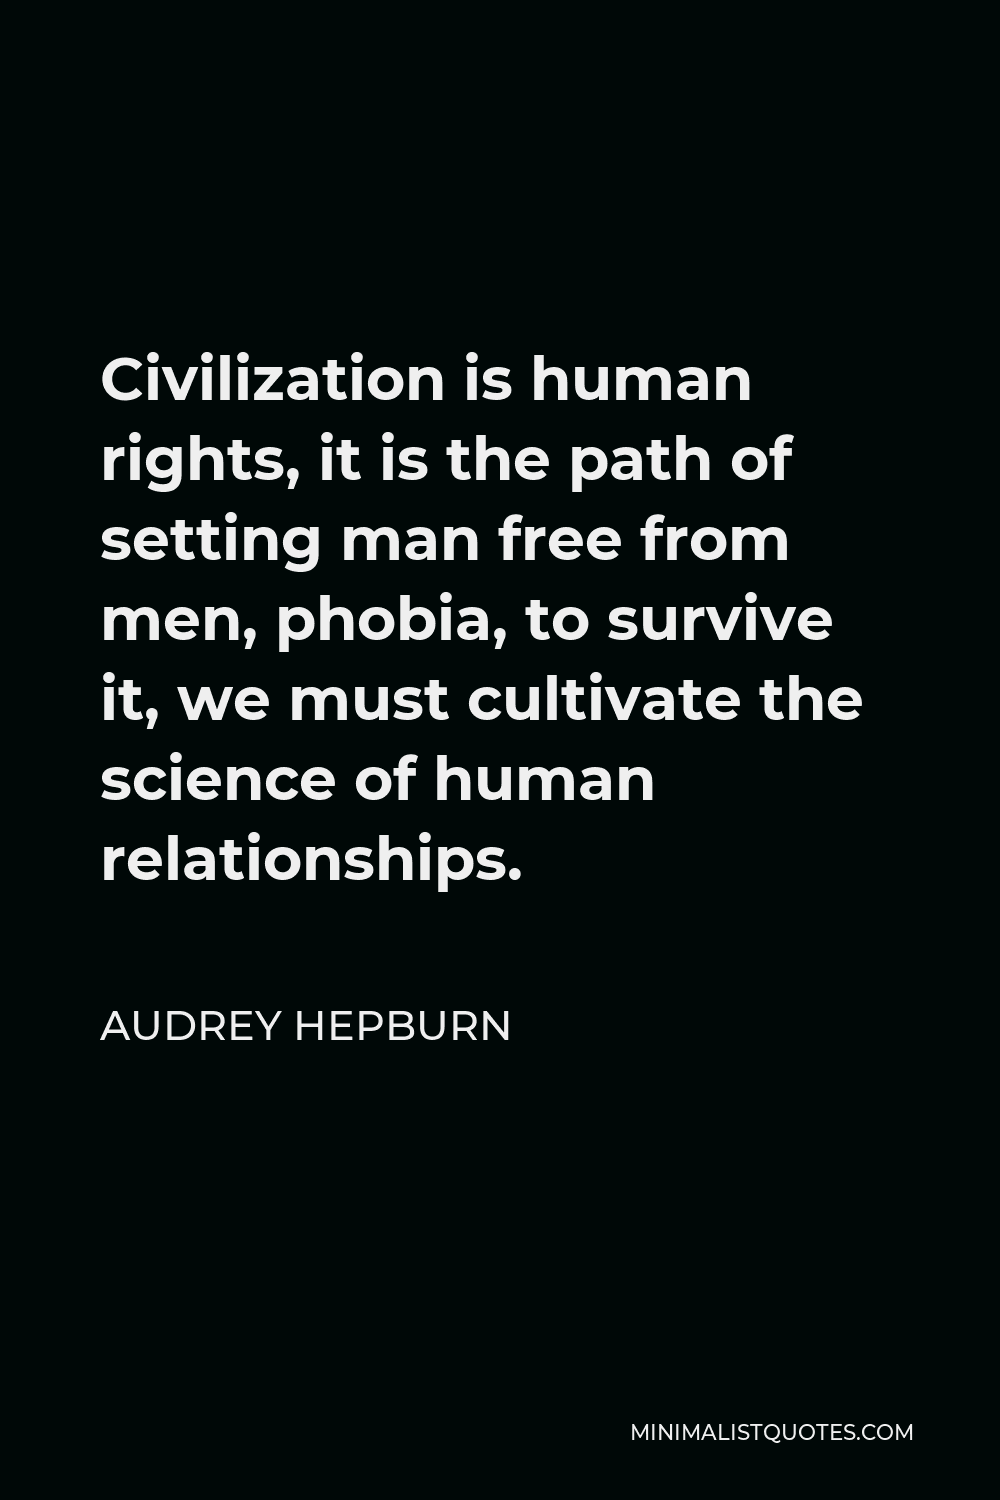 Audrey Hepburn Quote - Civilization is human rights, it is the path of setting man free from men, phobia, to survive it, we must cultivate the science of human relationships.